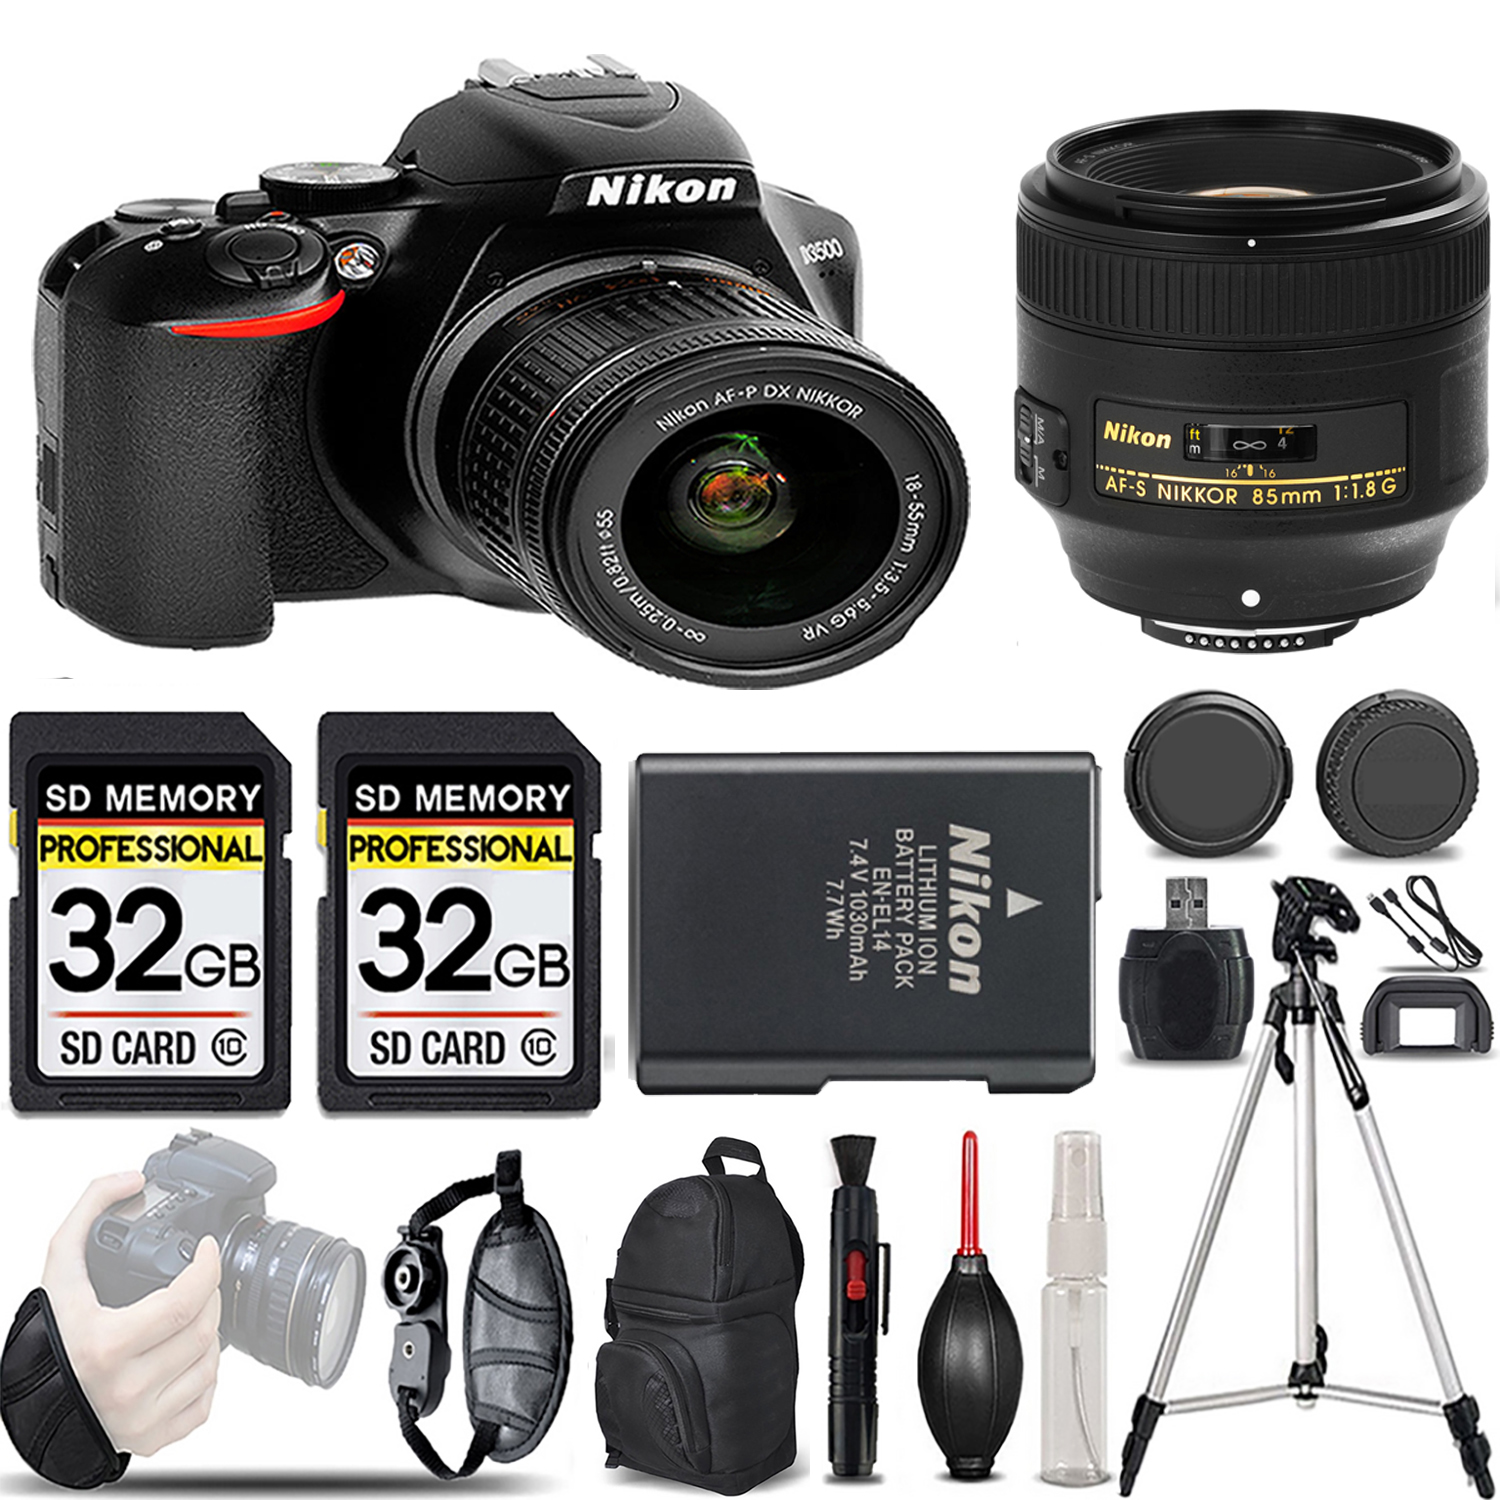 D3500 DSLR Camera with 18-55mm Lens + 85mm f/1.8G Lens - LOADED KIT *FREE SHIPPING*